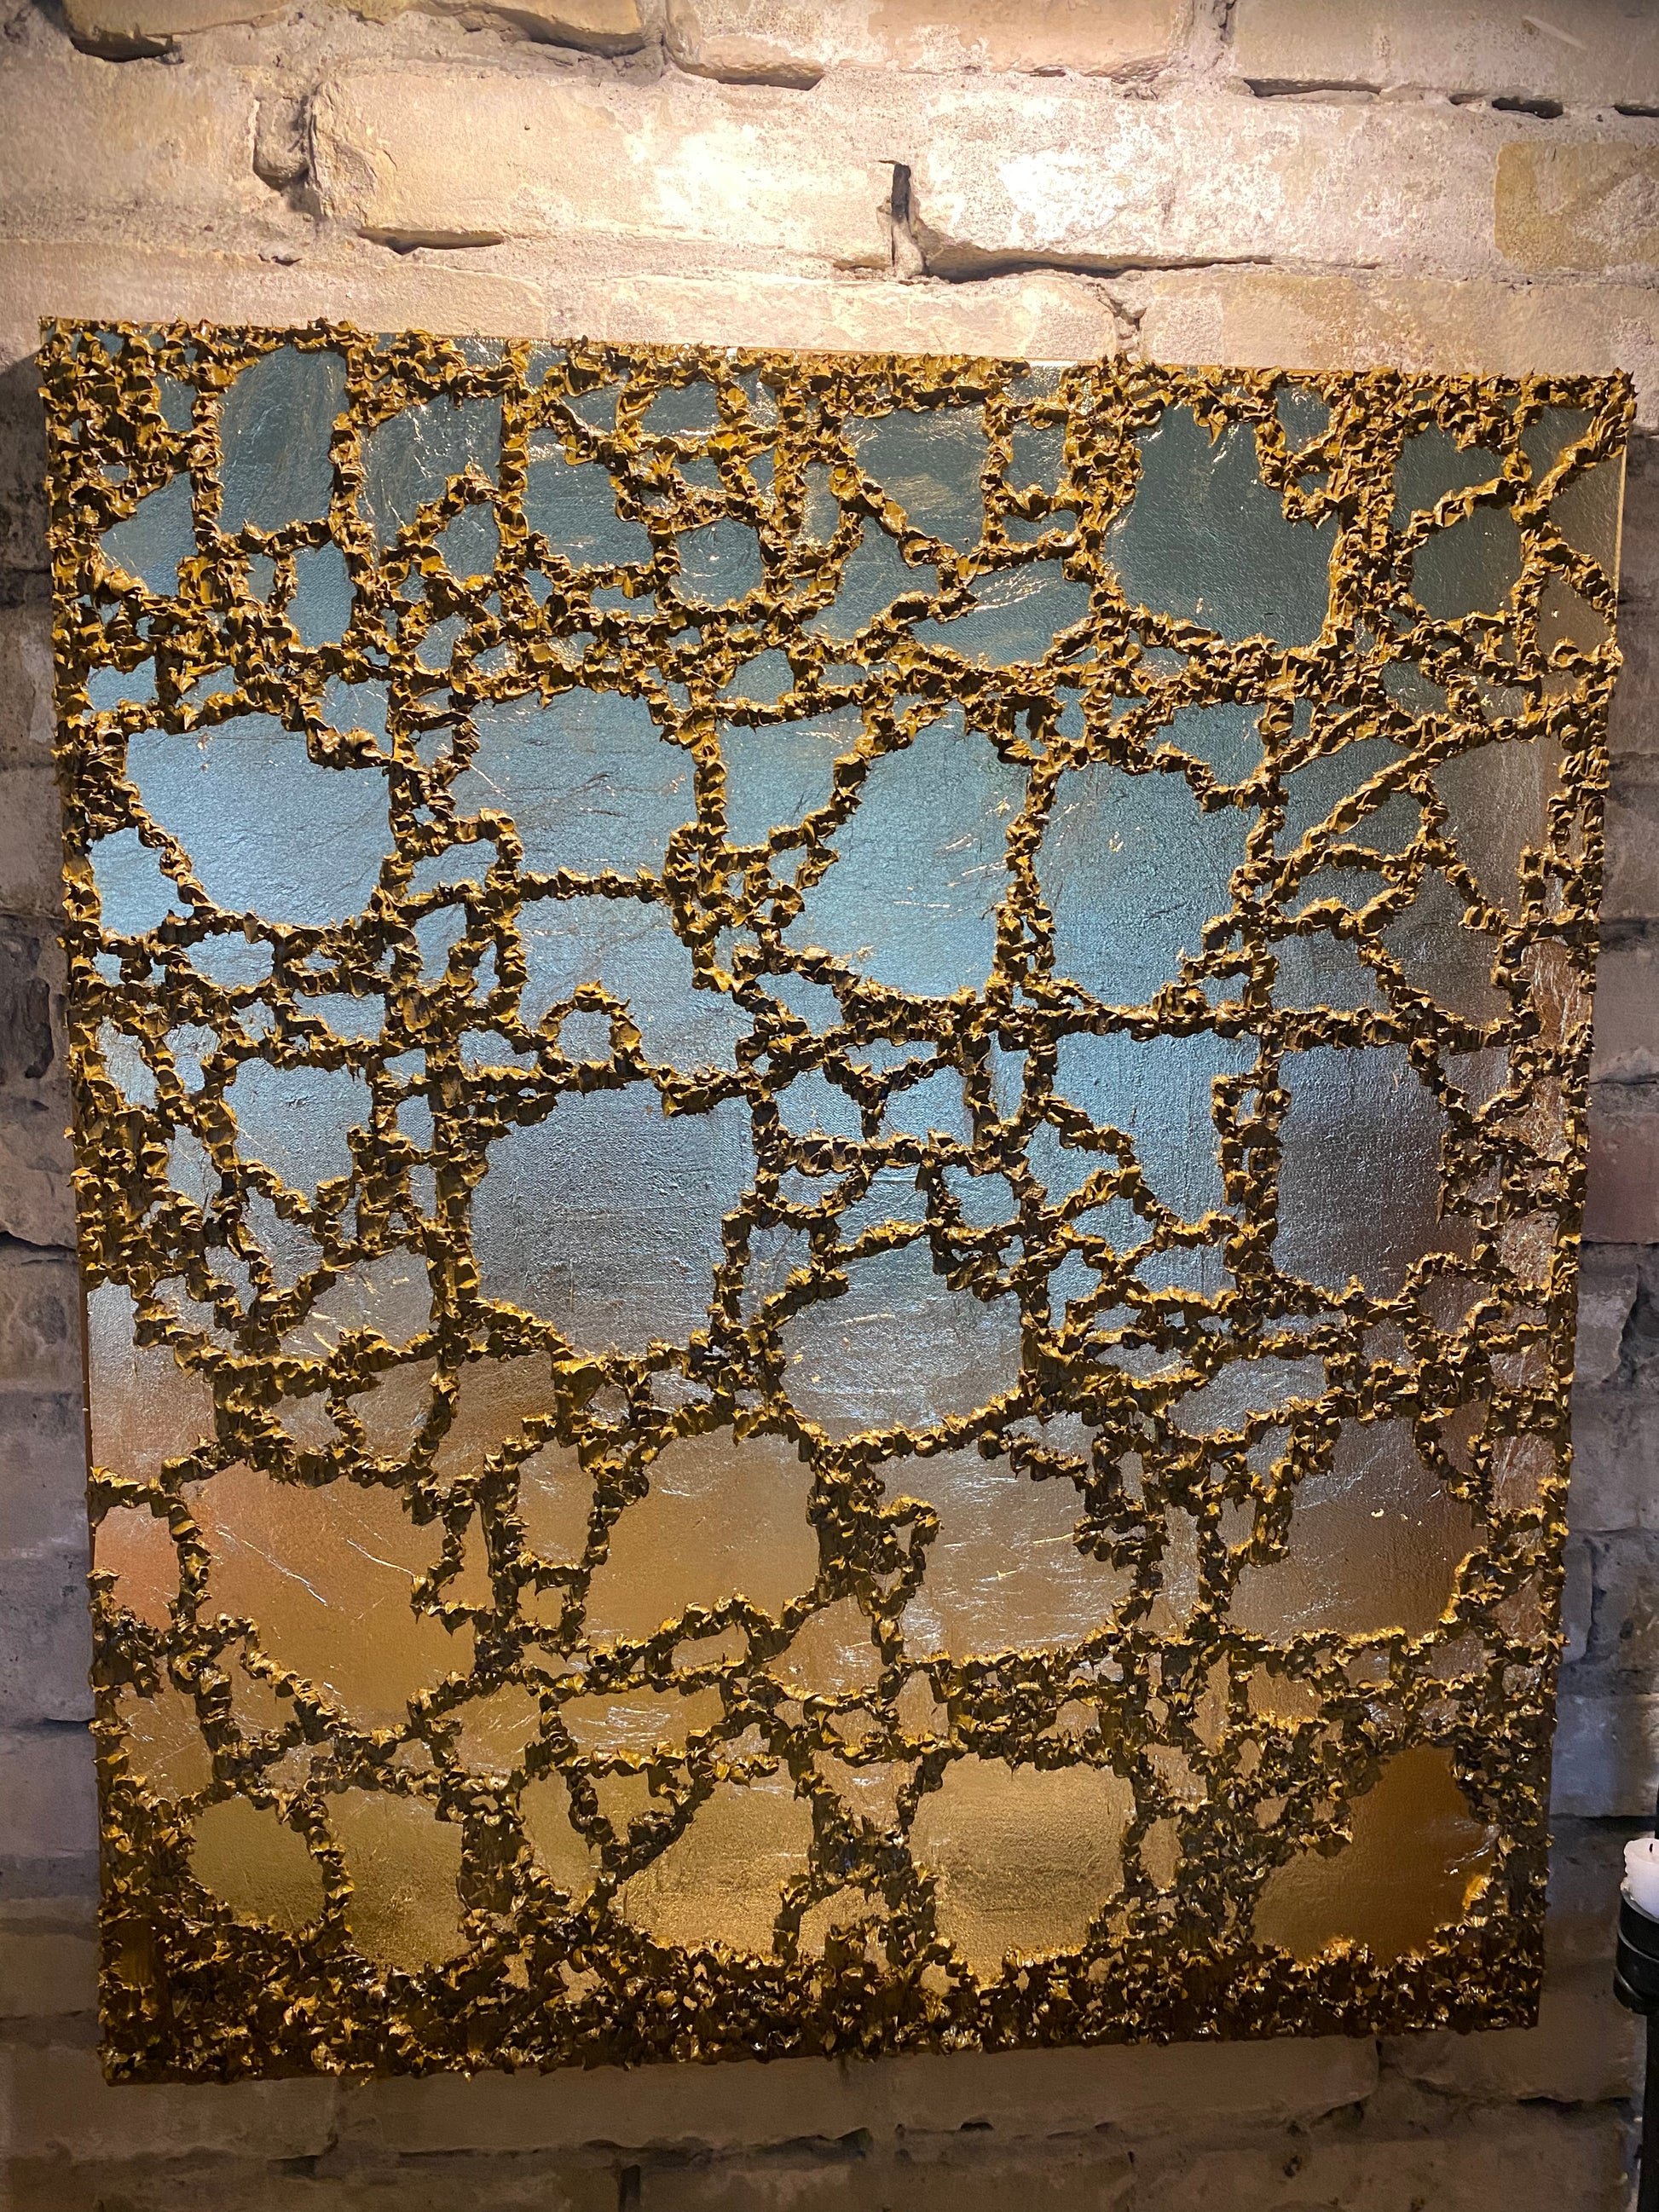 GOLD PAINTING - arteoshome